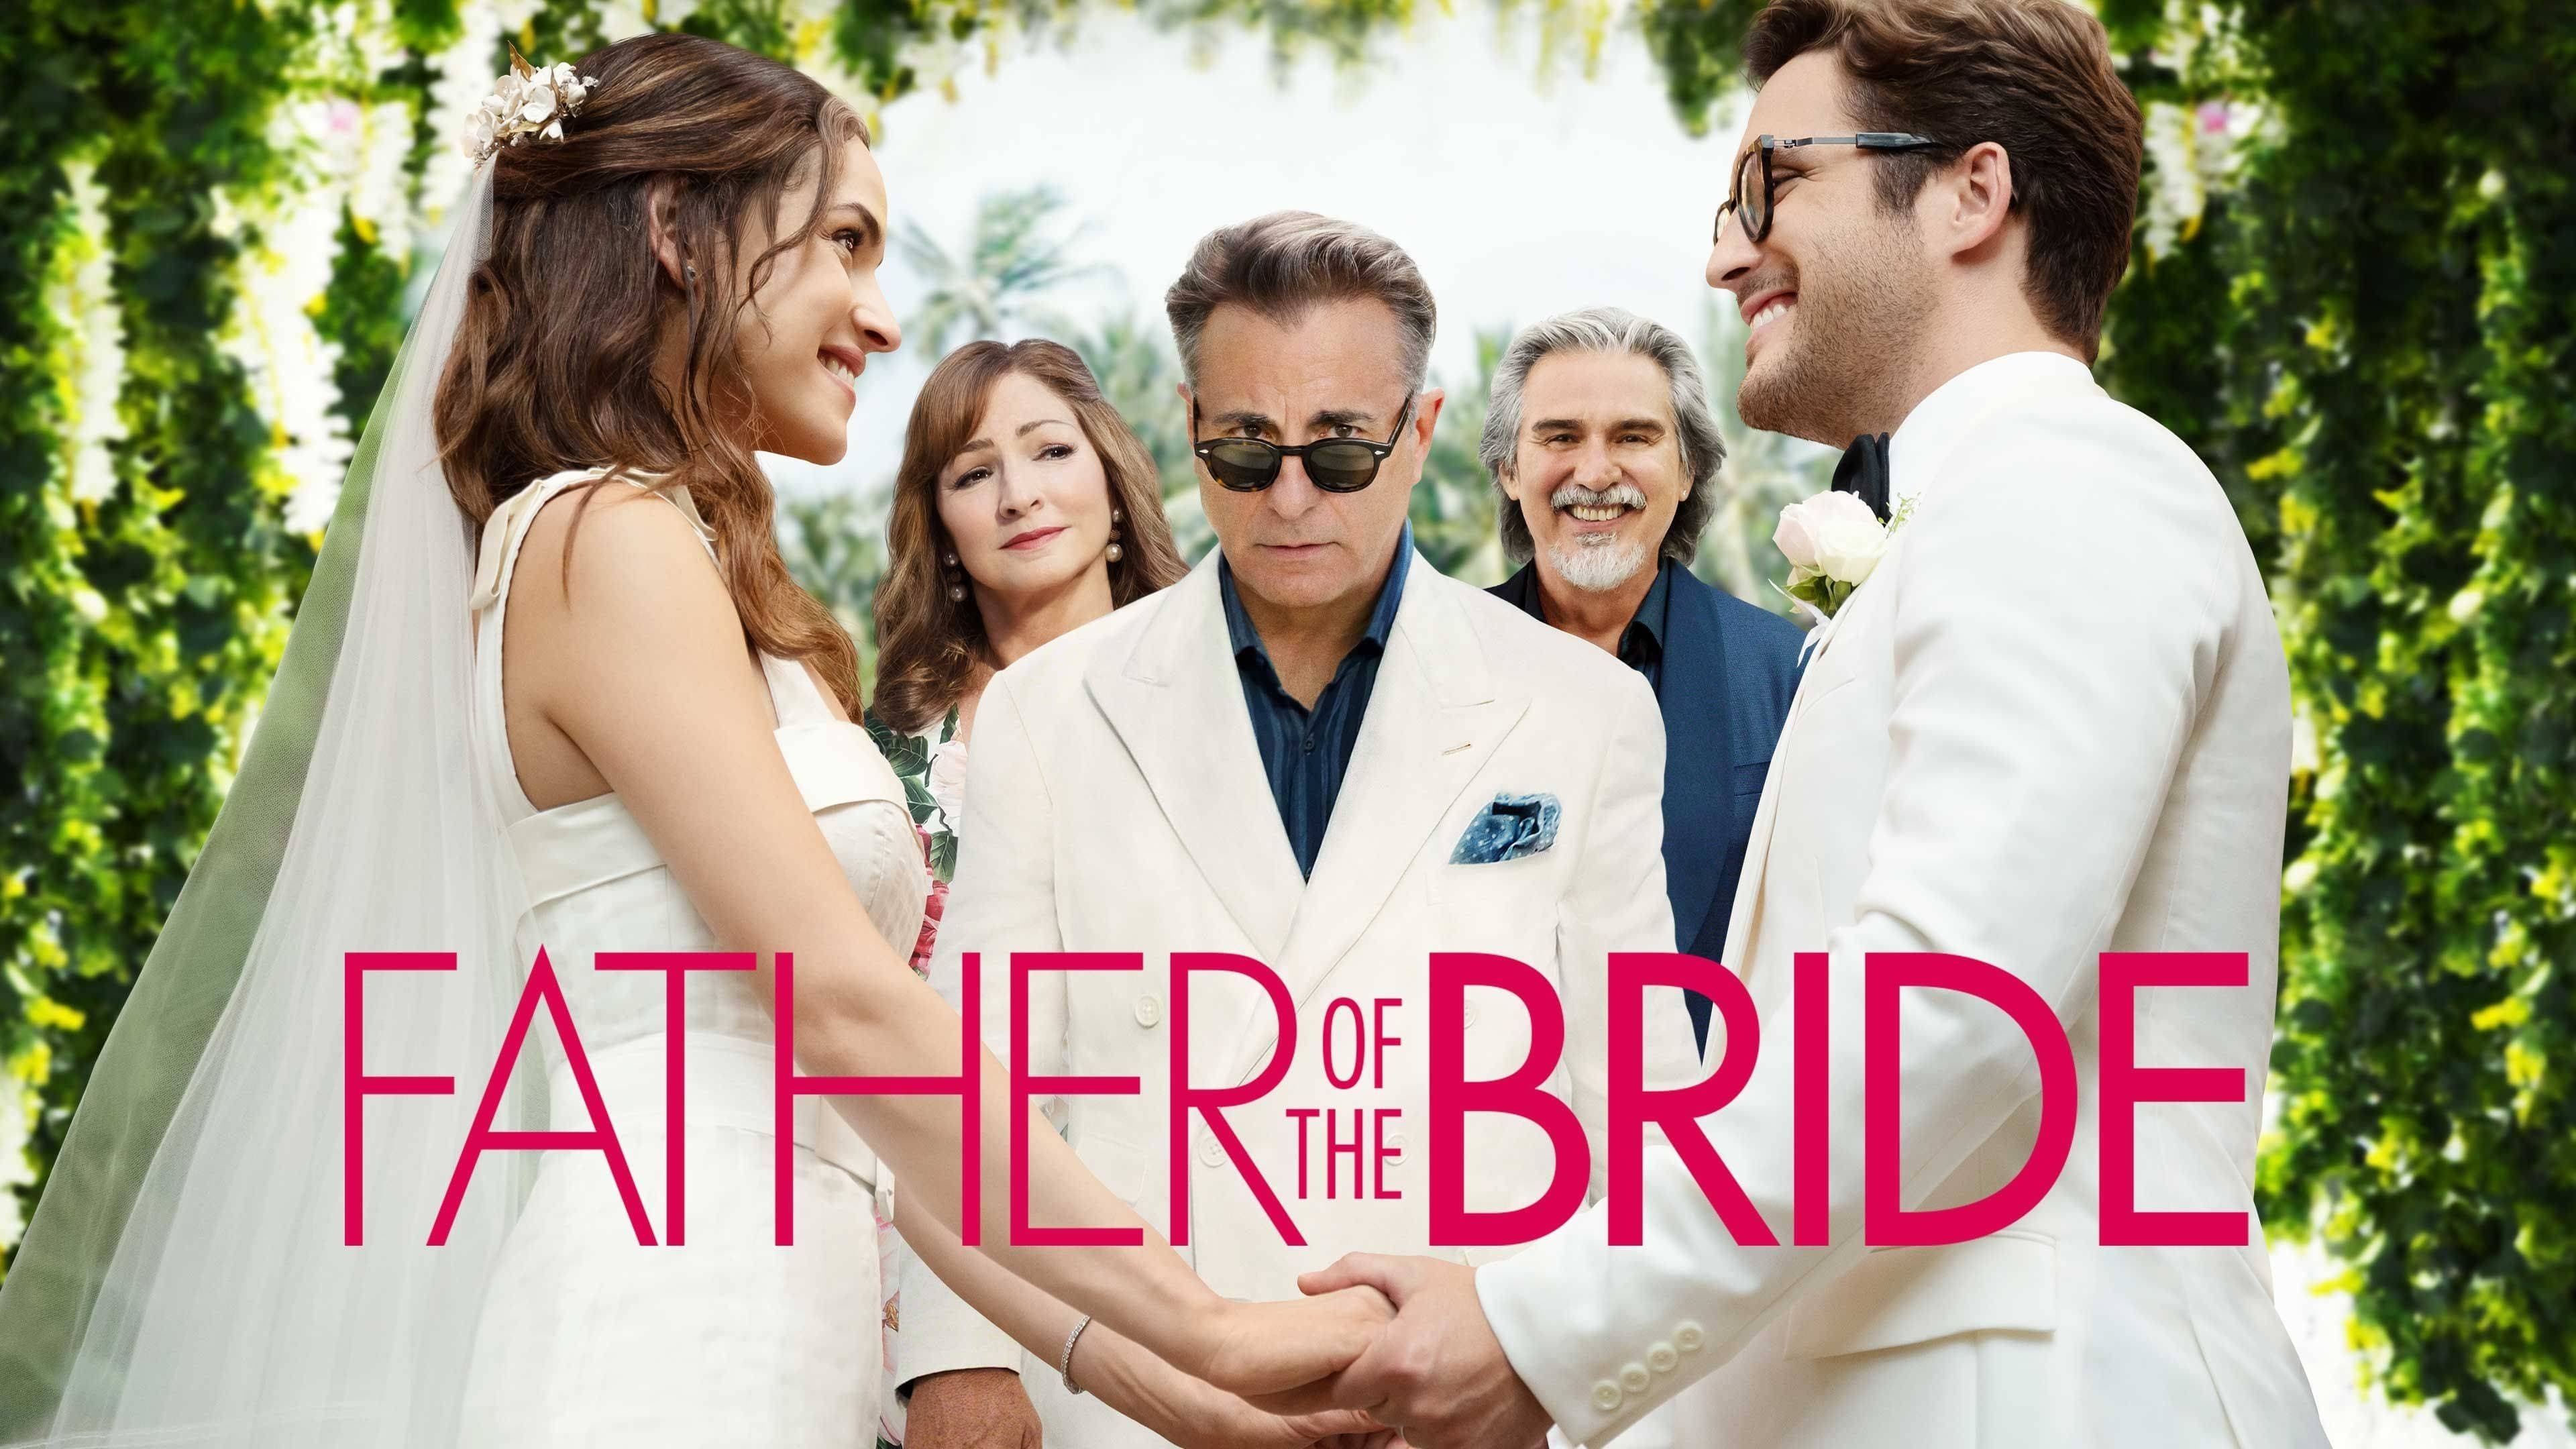 Father of the Bride movies, HBO Max releases, Coming in June 2022, The Streamable, 3840x2160 4K Desktop